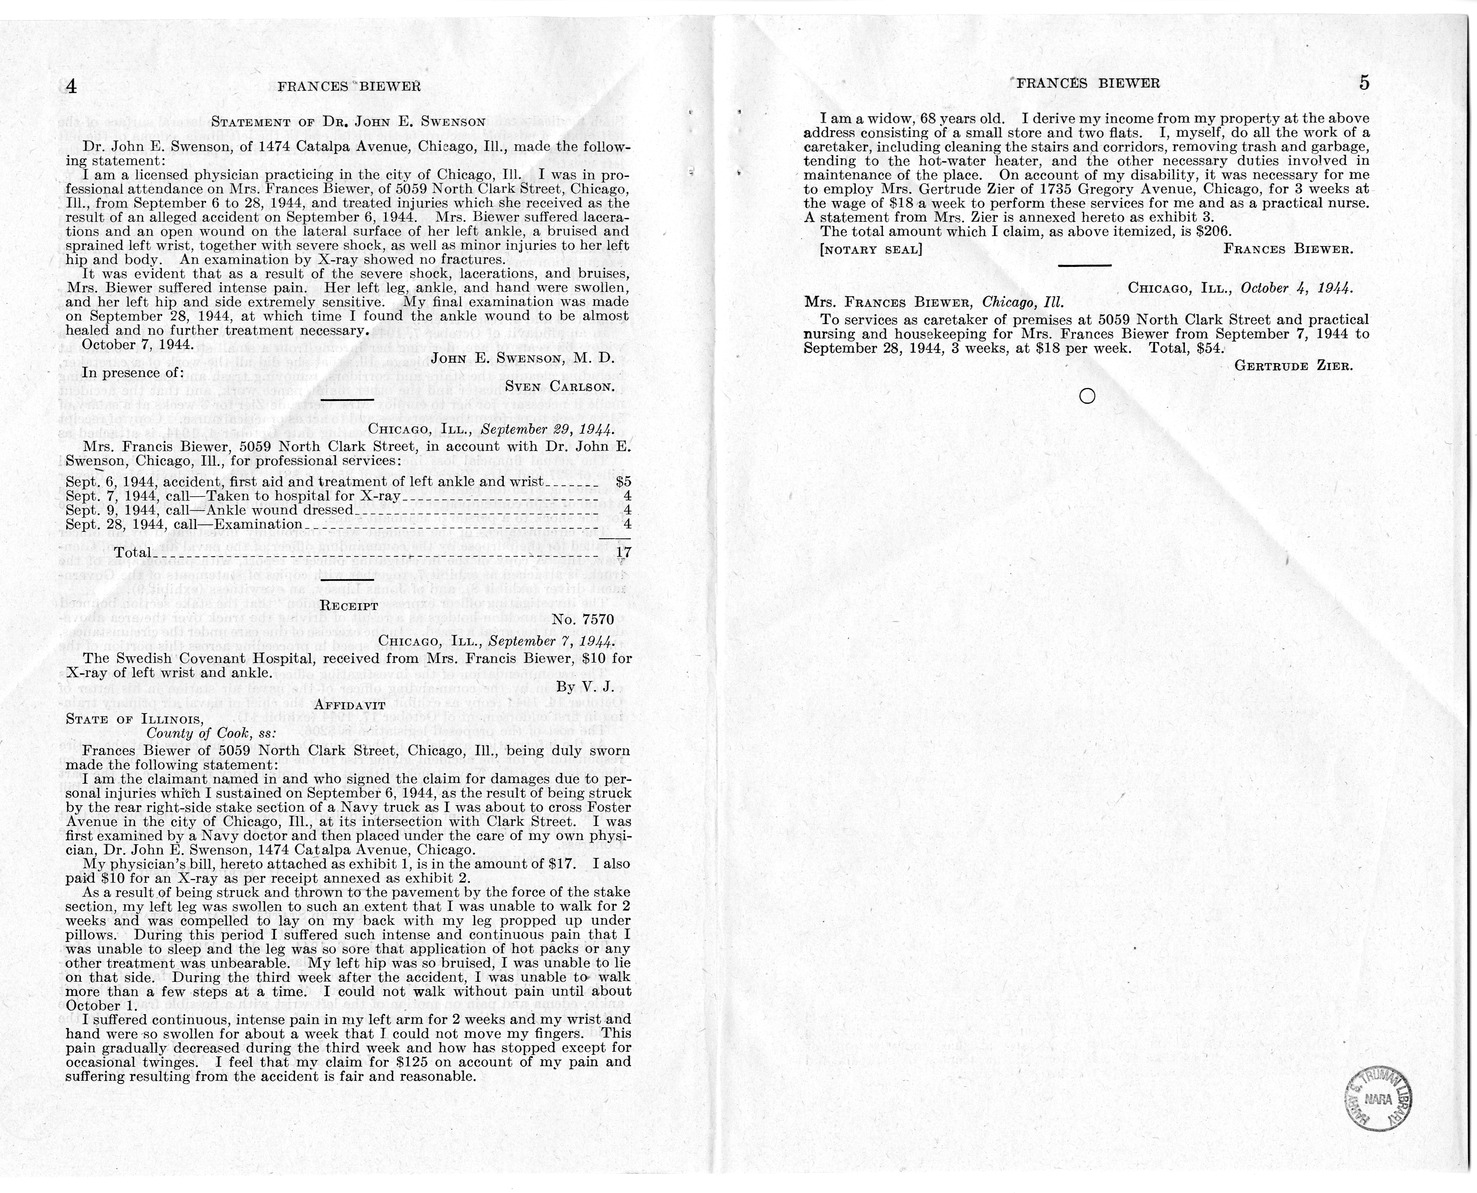 Memorandum from Frederick J. Bailey to M. C. Latta, H.R. 856, For the Relief of Frances Biewer, with Attachments